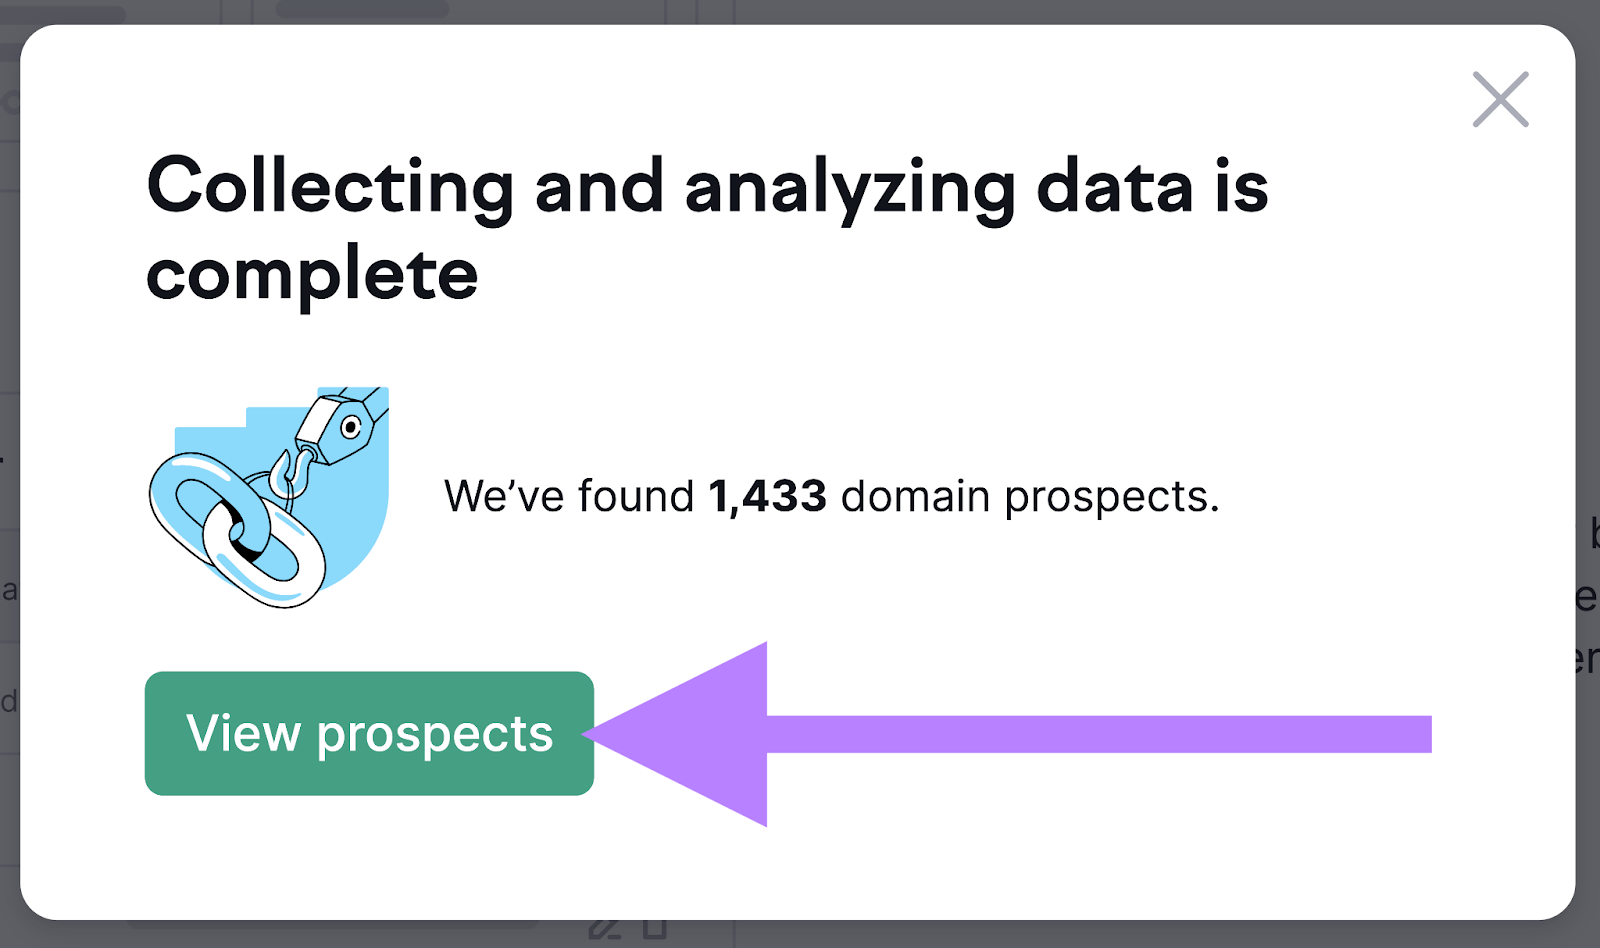 “Collecting and analyzing data is complete” pop-up